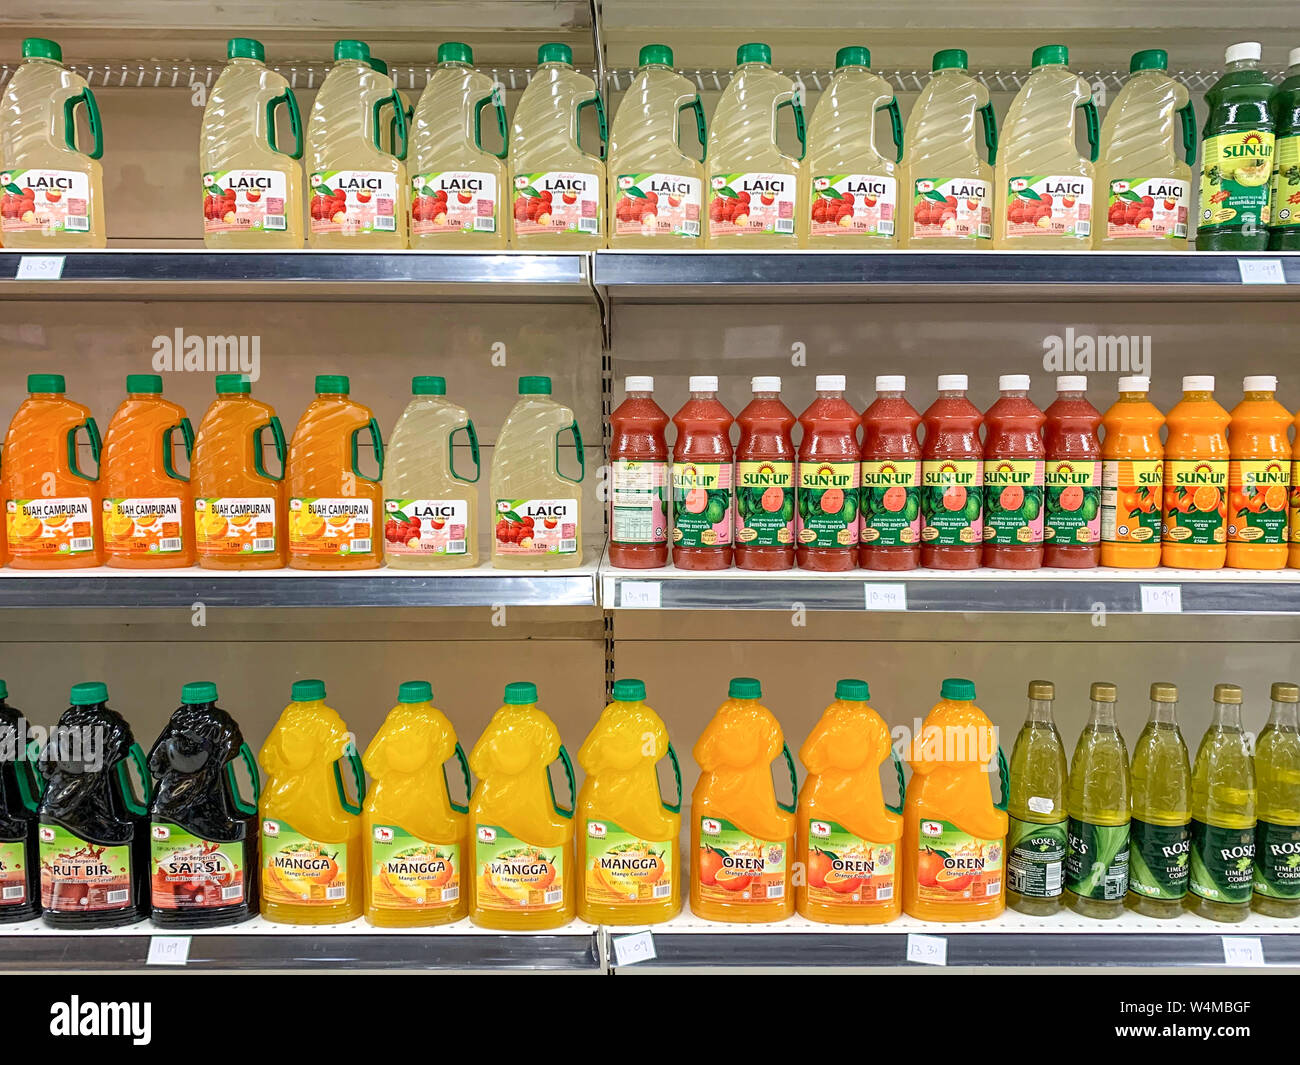 Kuala Lumpur, Malaysia - July 21, 2019: Various type of bottled drinks and juices on display at the shelves of Cold Storage supermarket. Illustrative Stock Photo